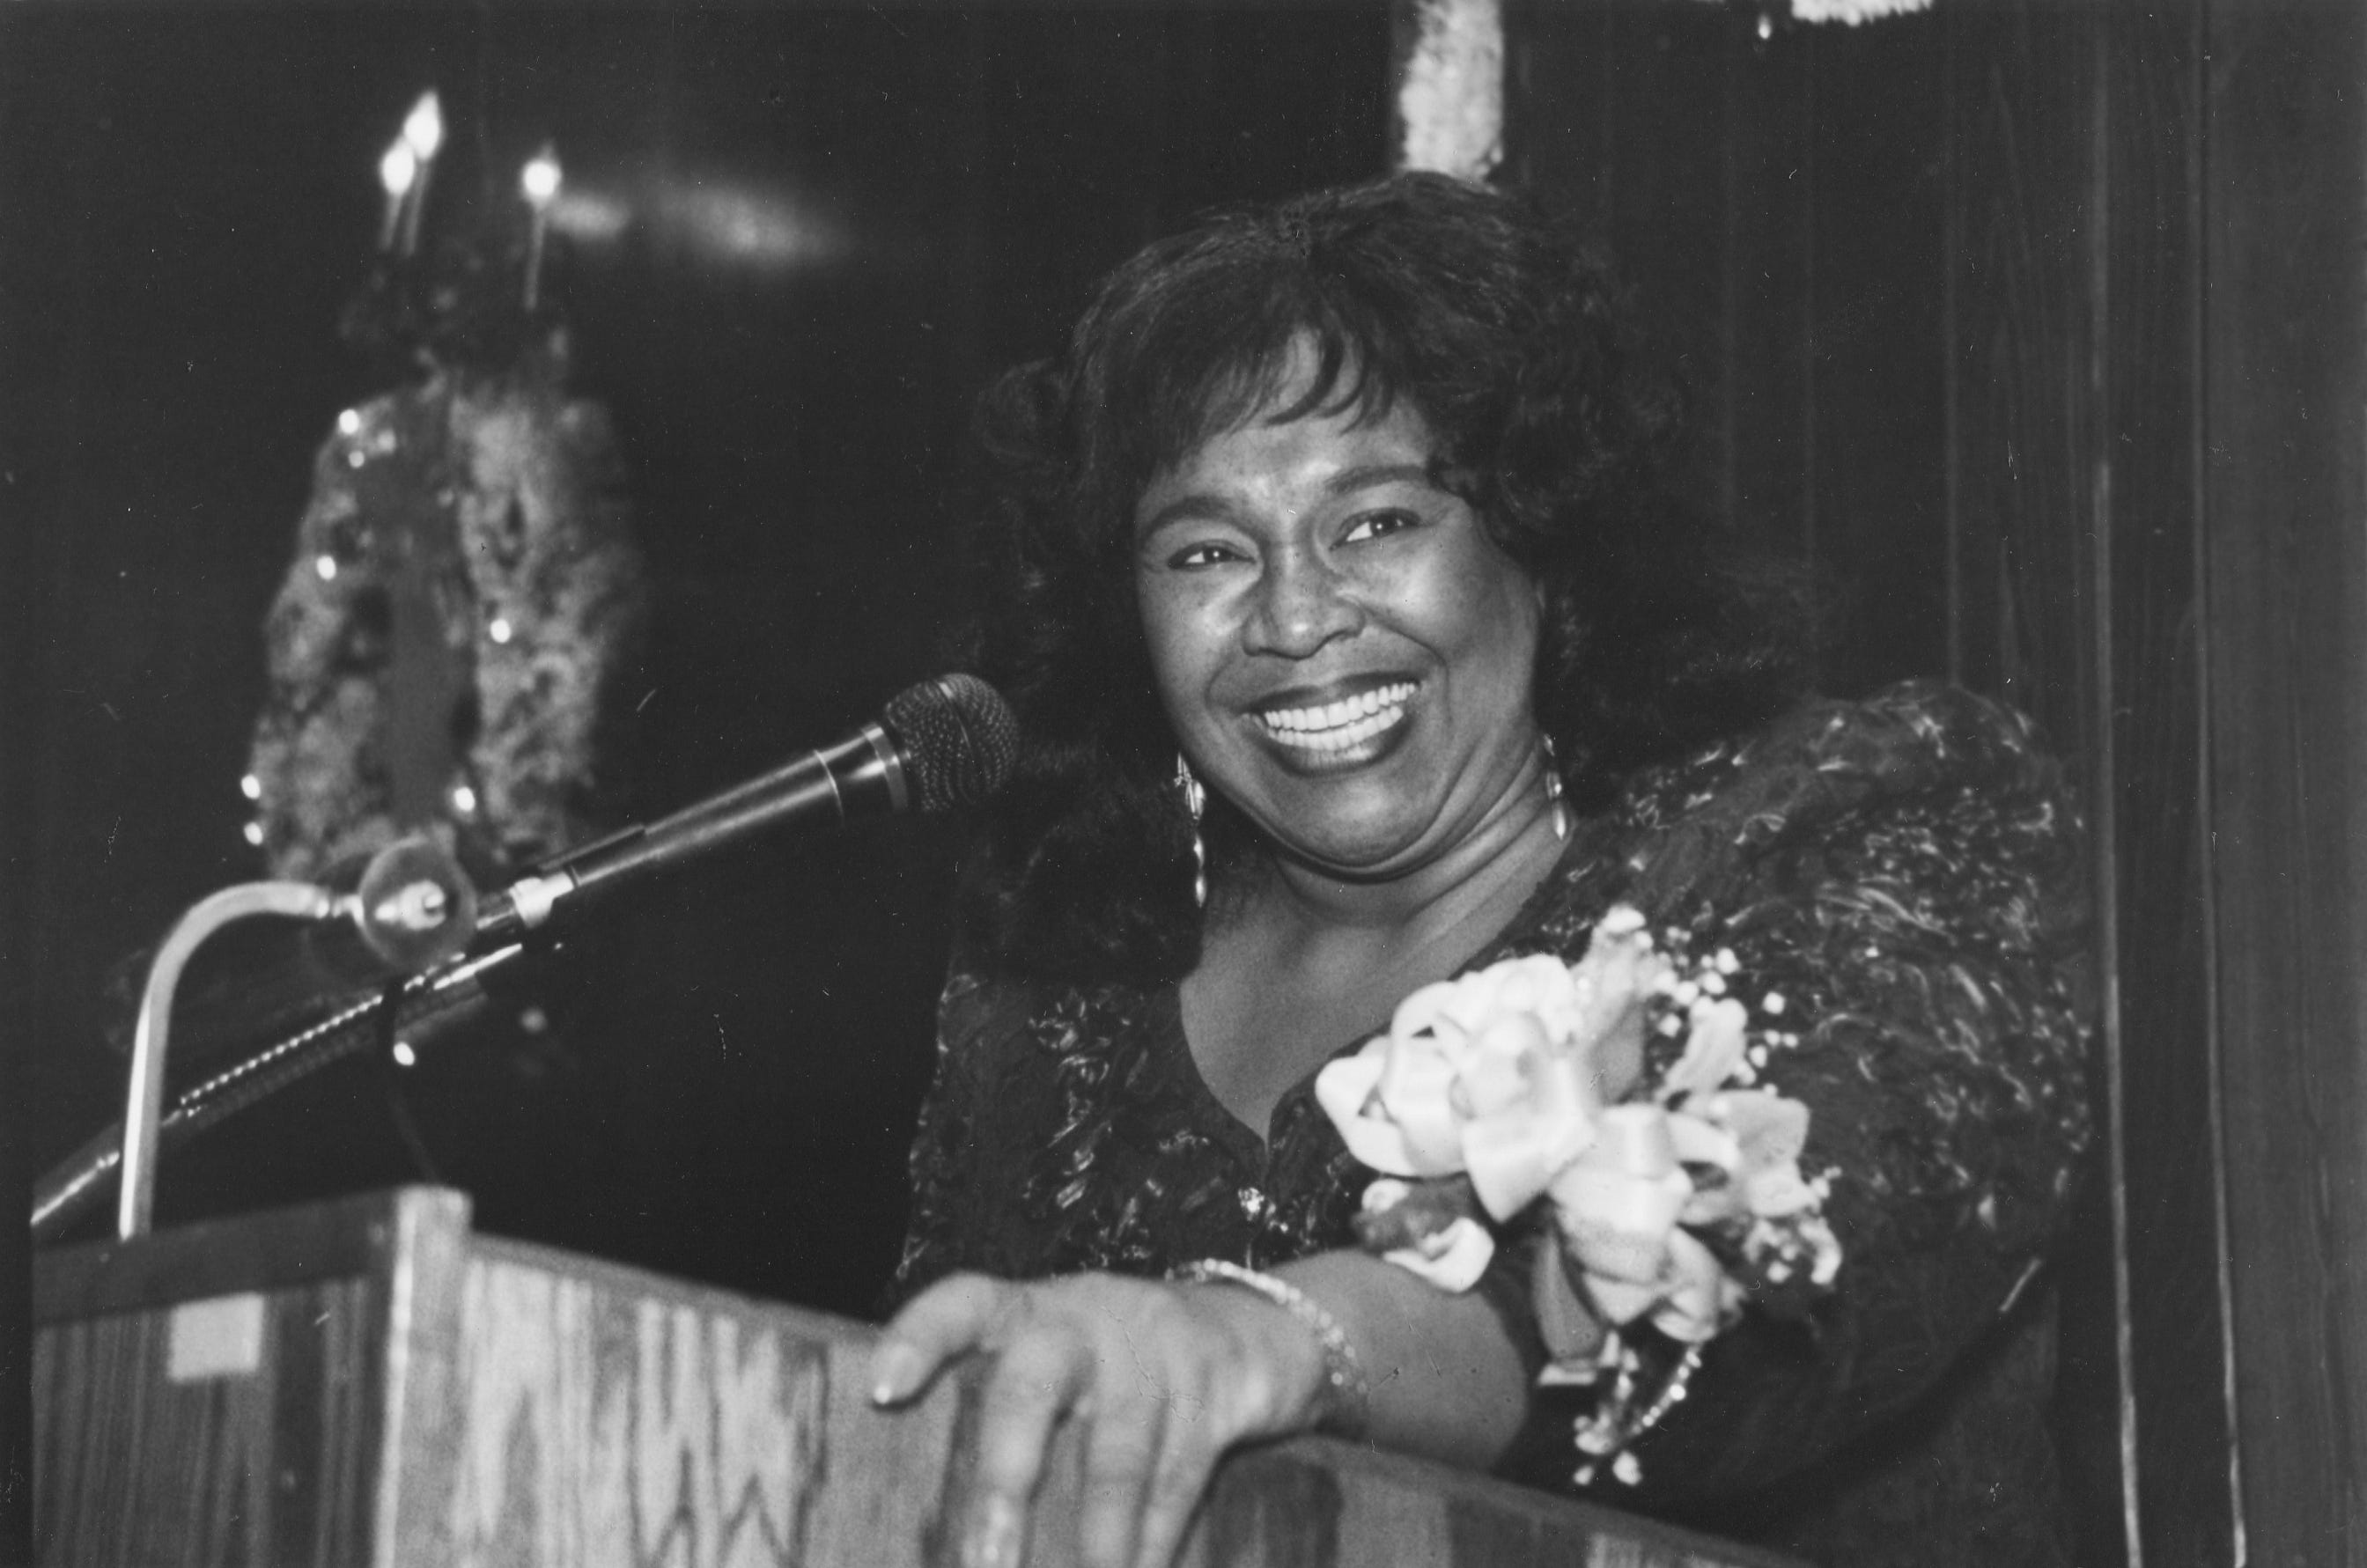 Longtime community activist and Detroit Congresswoman Barbara-Rose Collins, seen here in a Dec. 4, 1990 photo, died at the age of 82, her family announced in a statement on Thursday, Nov. 4, 2021. Collins was elected to the U.S. House in 1990, becoming the first Black woman from Michigan elected to Congress.